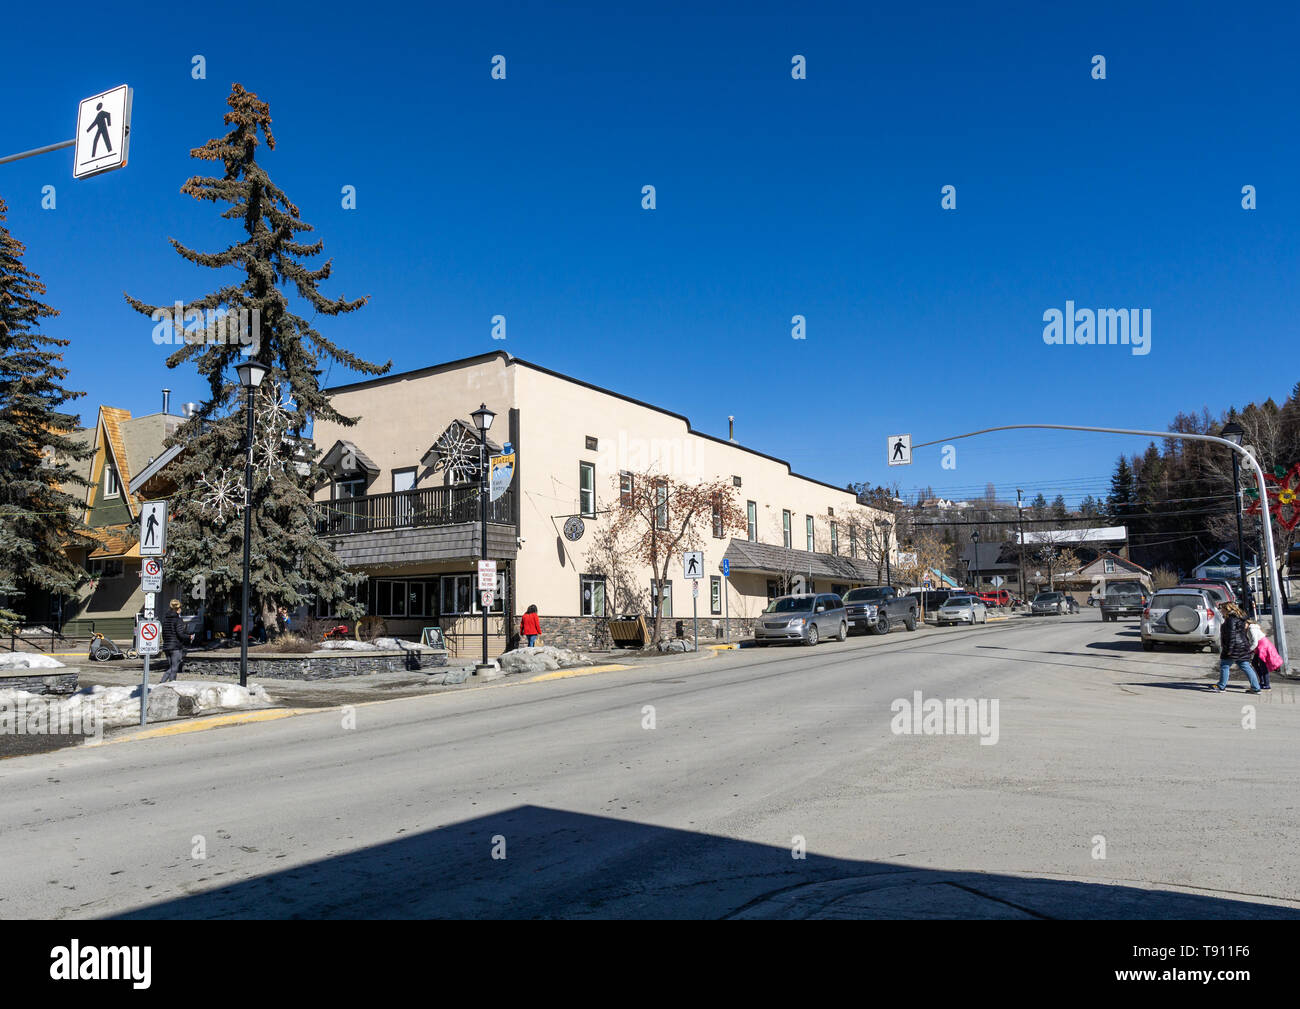 KIMBERLEY, CANADA - MARCH 19, 2019: street view and store front in small town british columbia Stock Photo